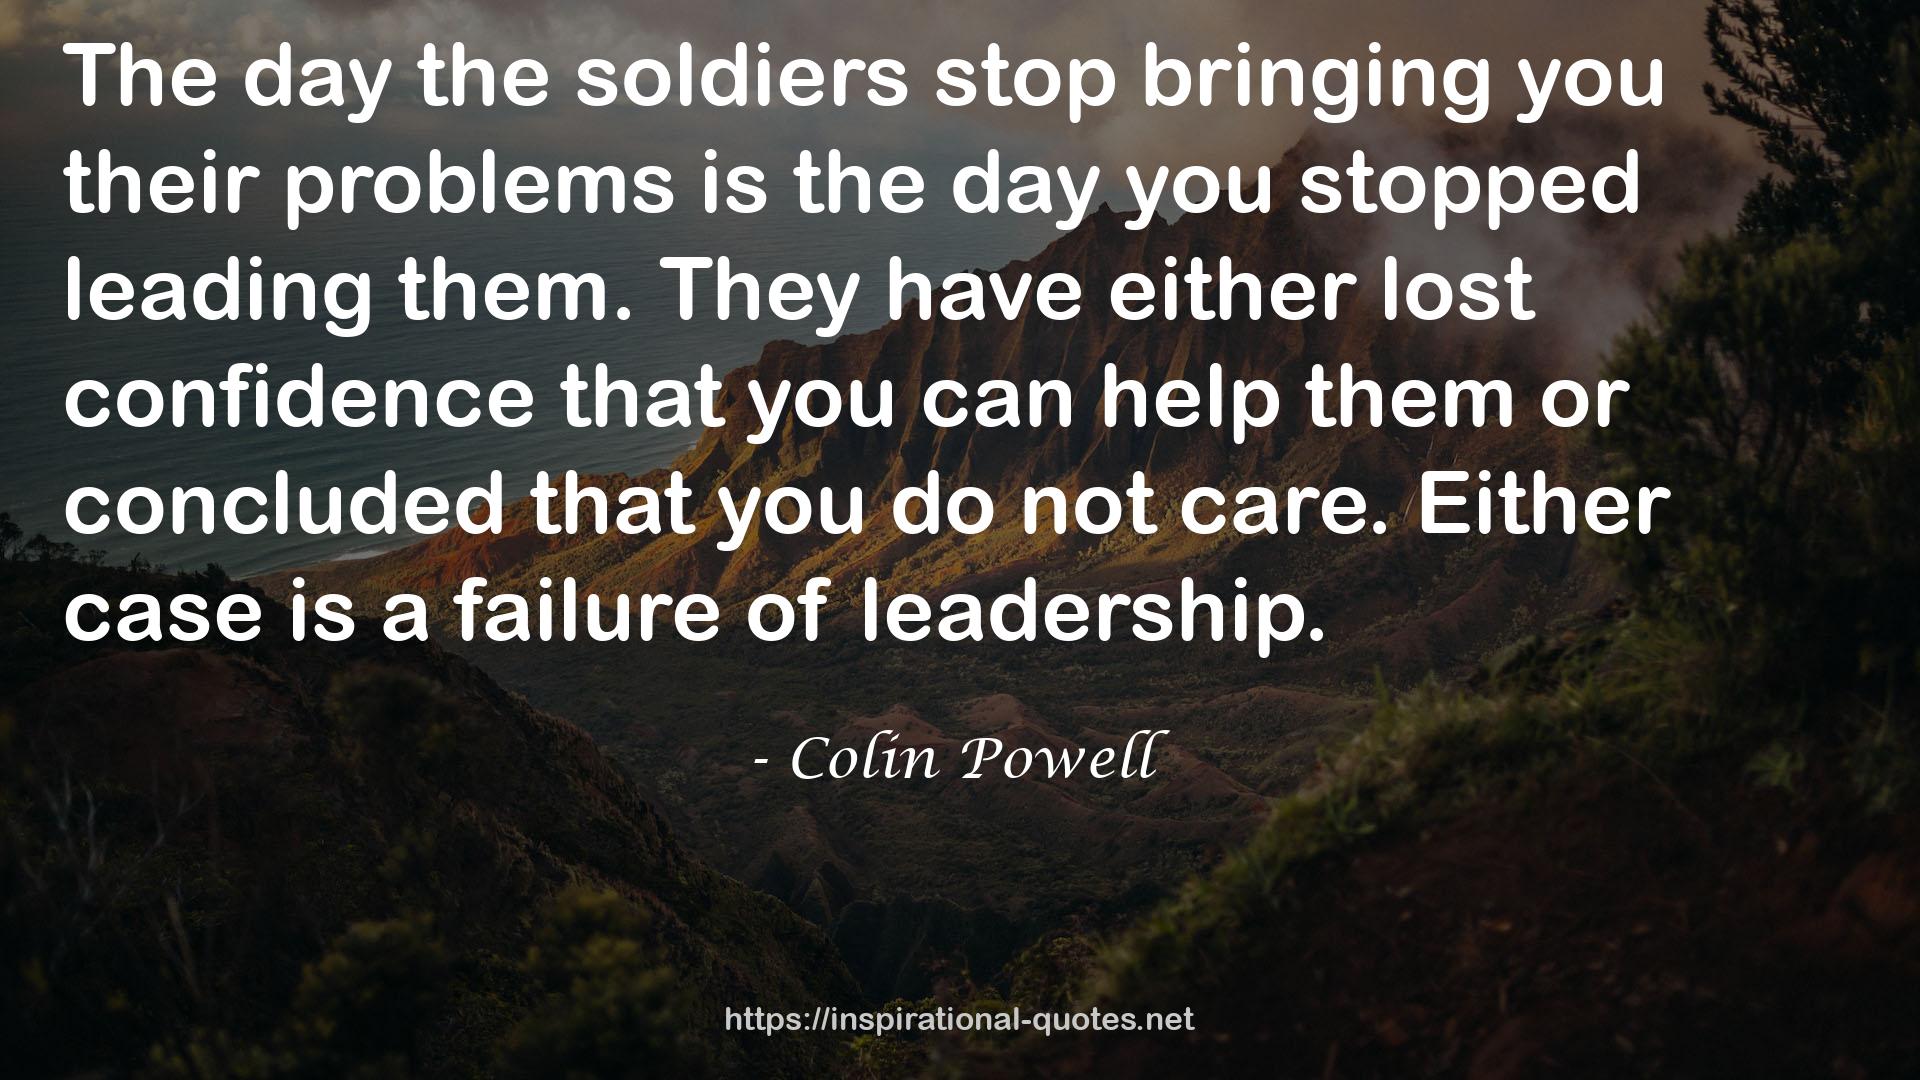 Colin Powell QUOTES